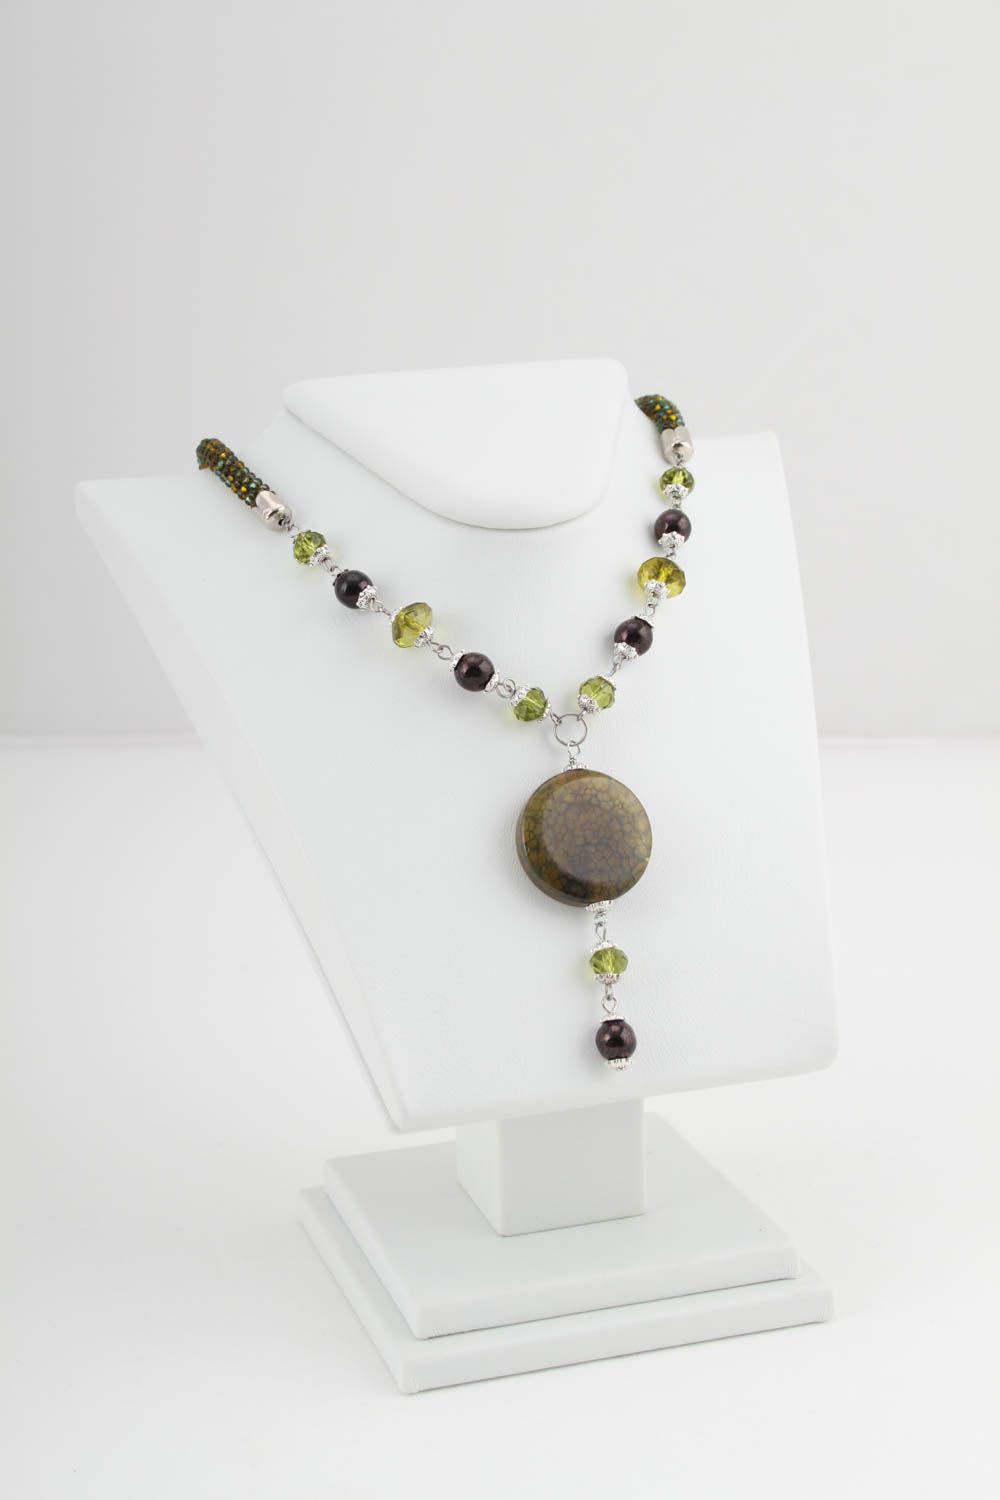 Handmade beaded necklace handmade necklace with natural stones fashion jewelry photo 1